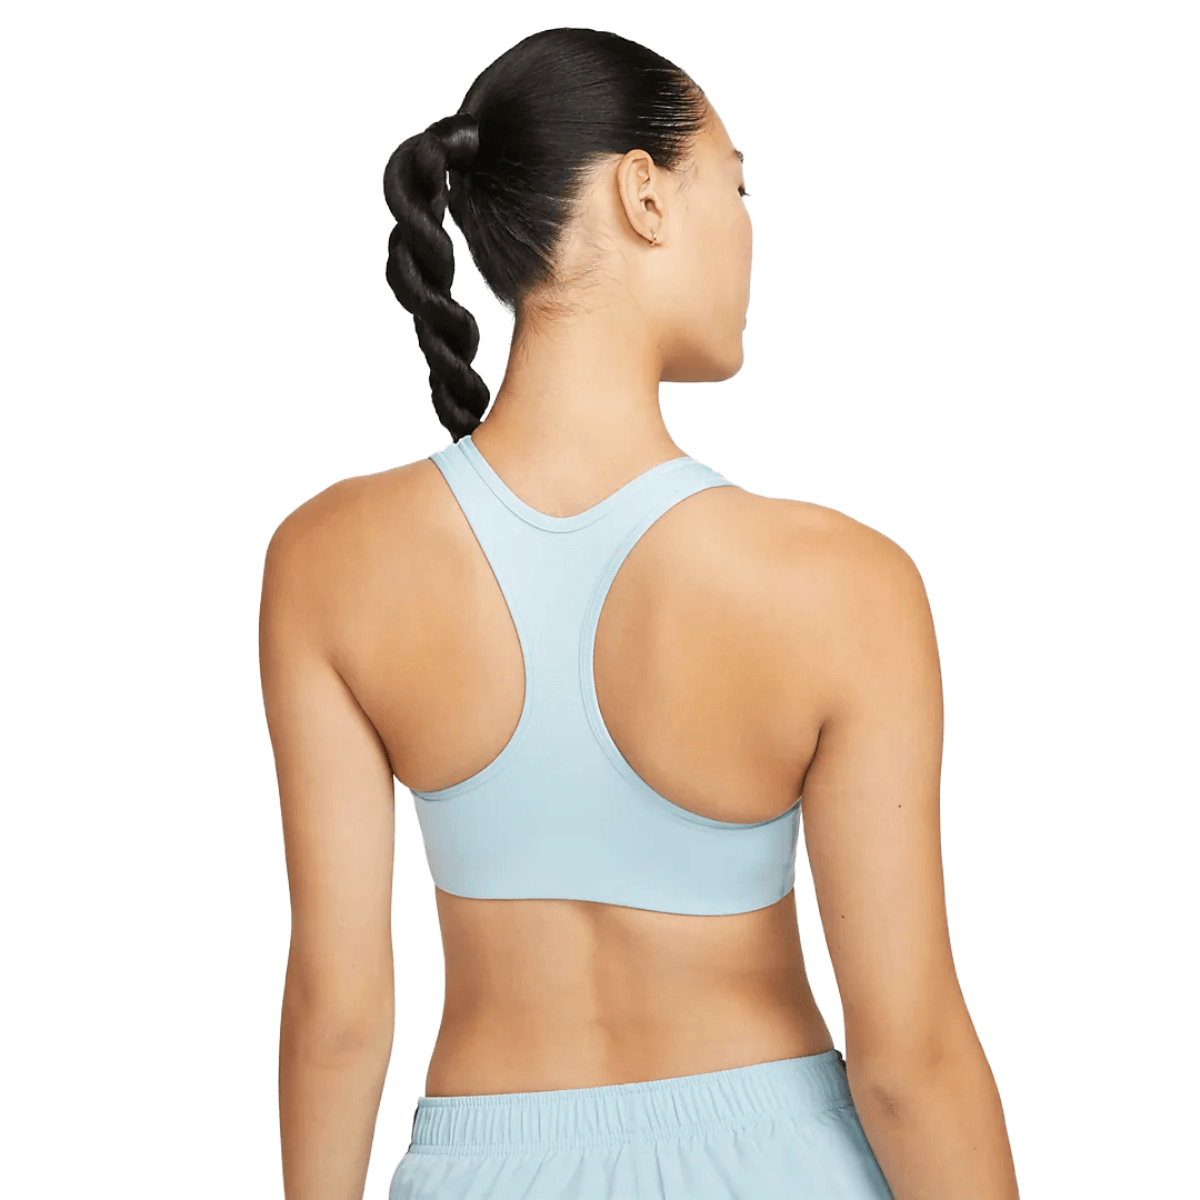 The North Face Printed Midline Bra - Women's